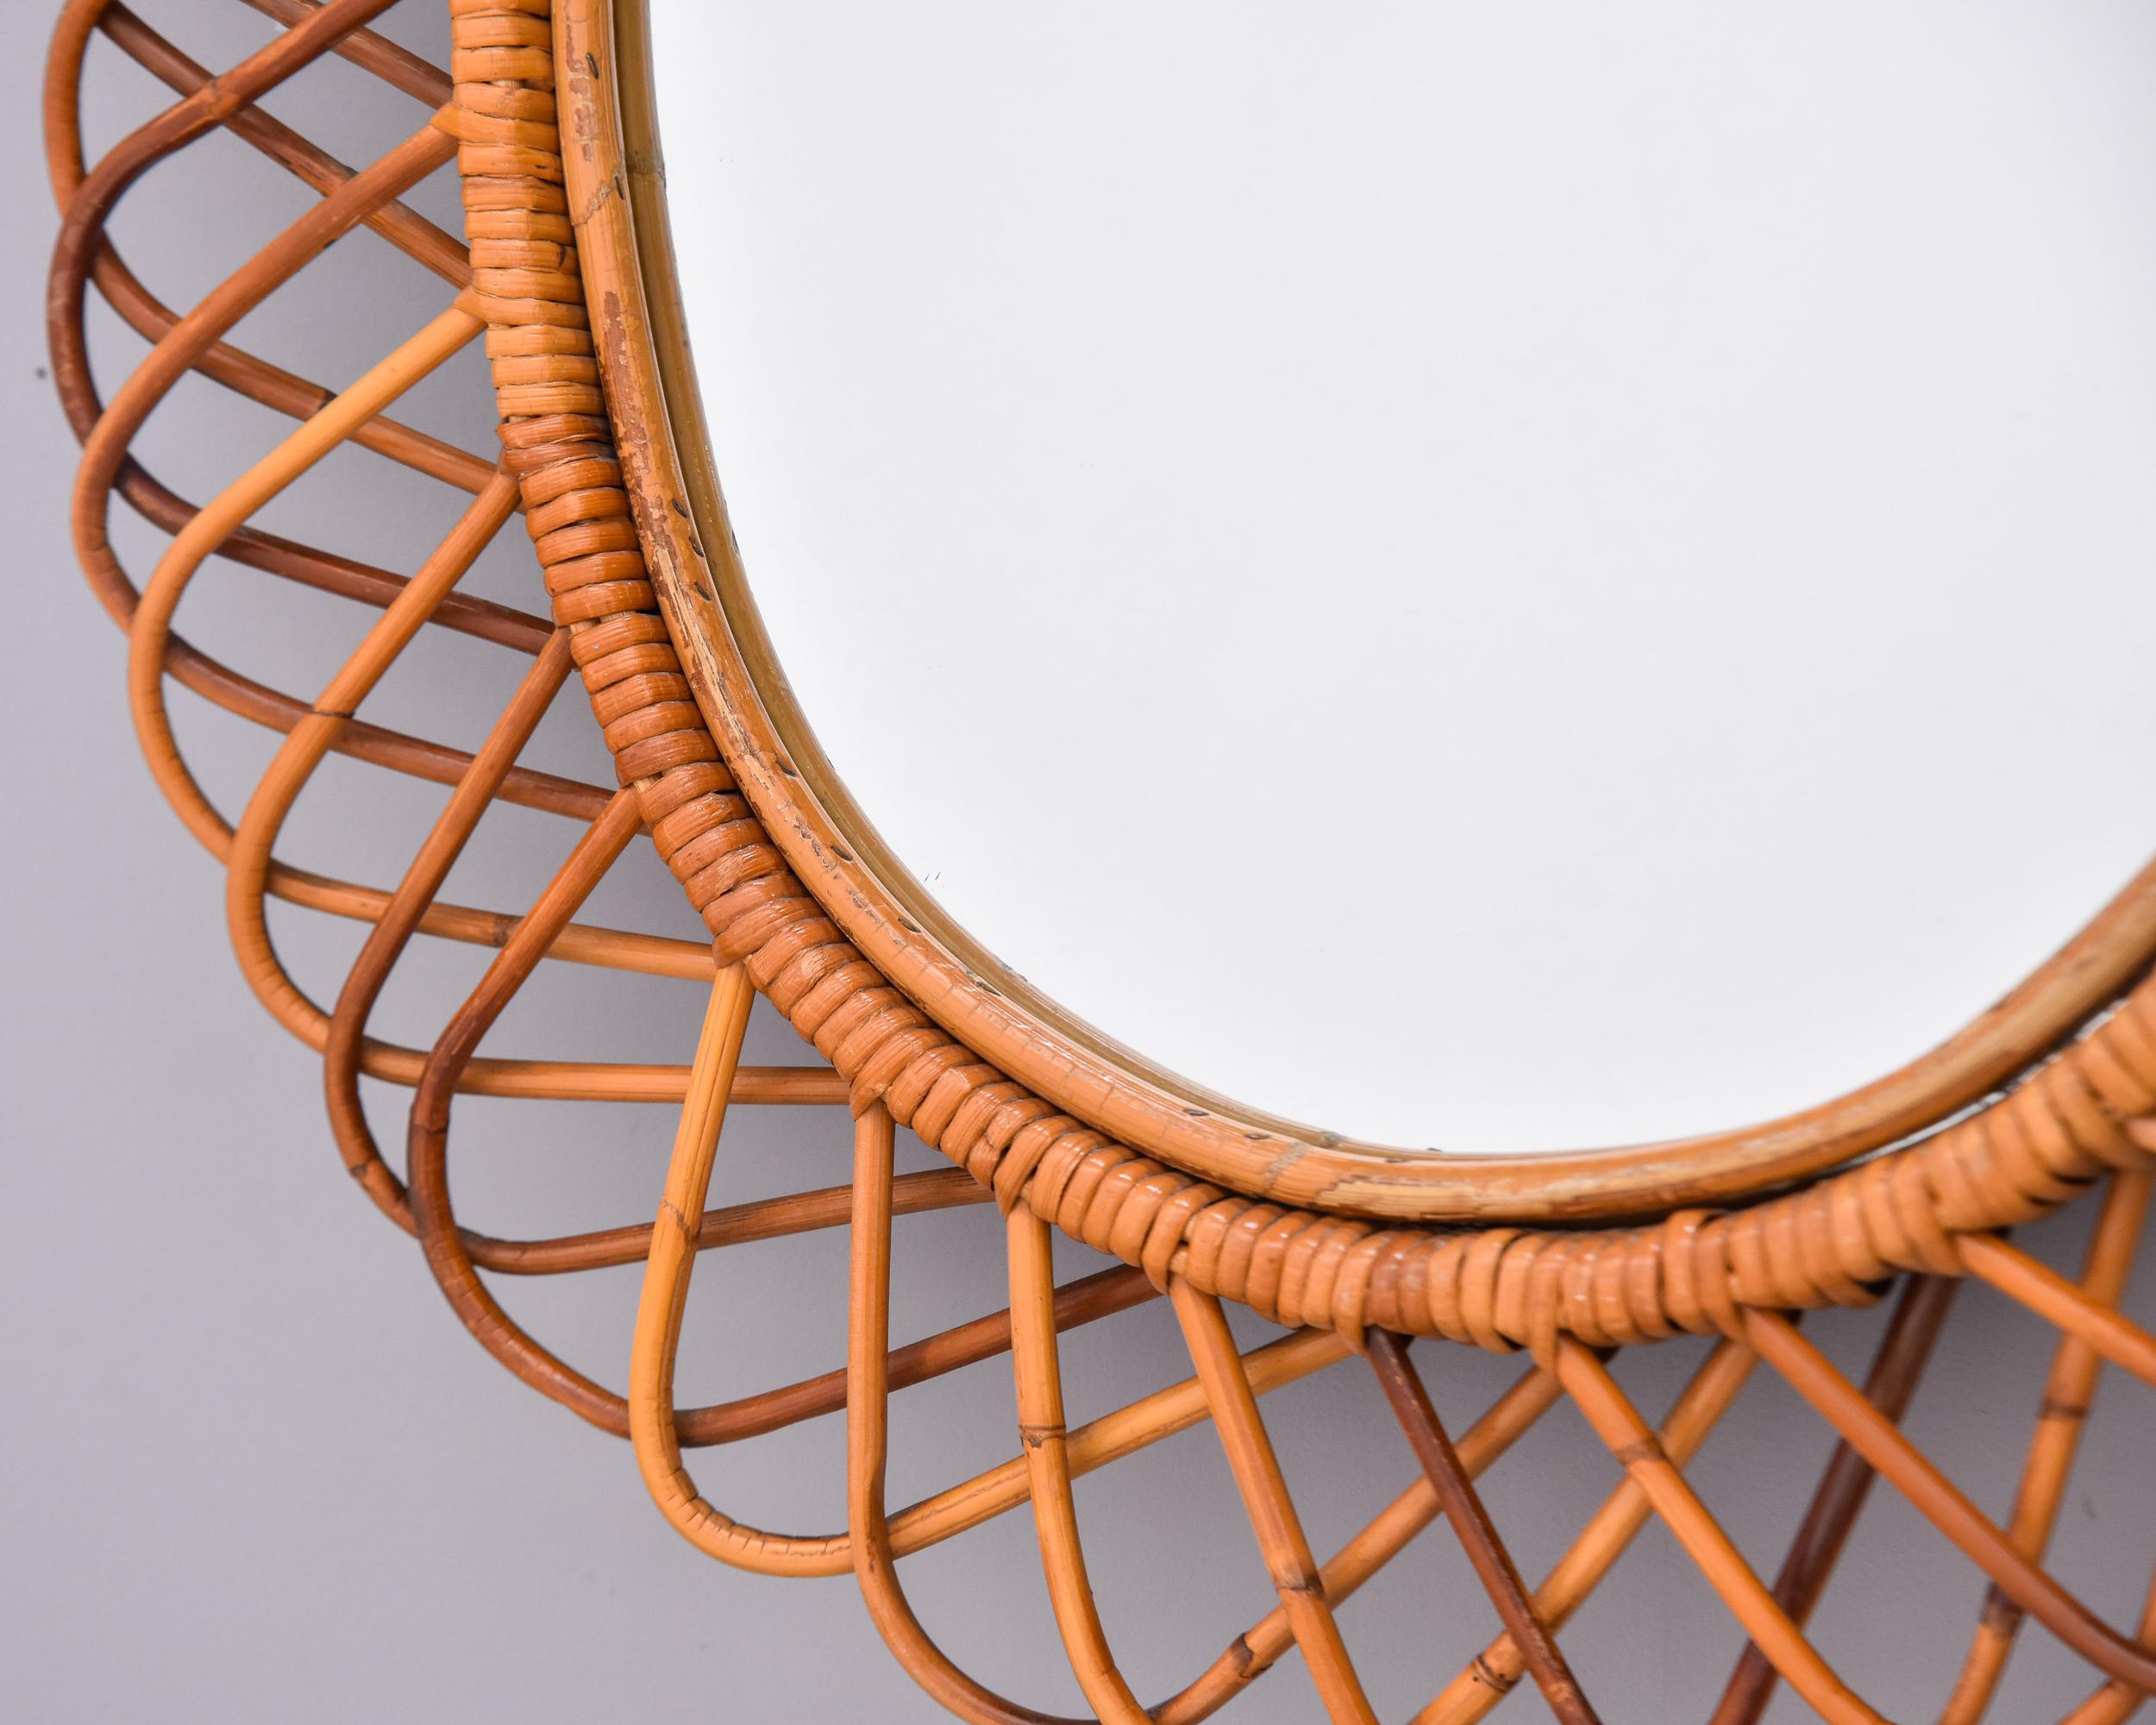 Midcentury Oval Mirror with Woven Rattan or Wicker Frame 2